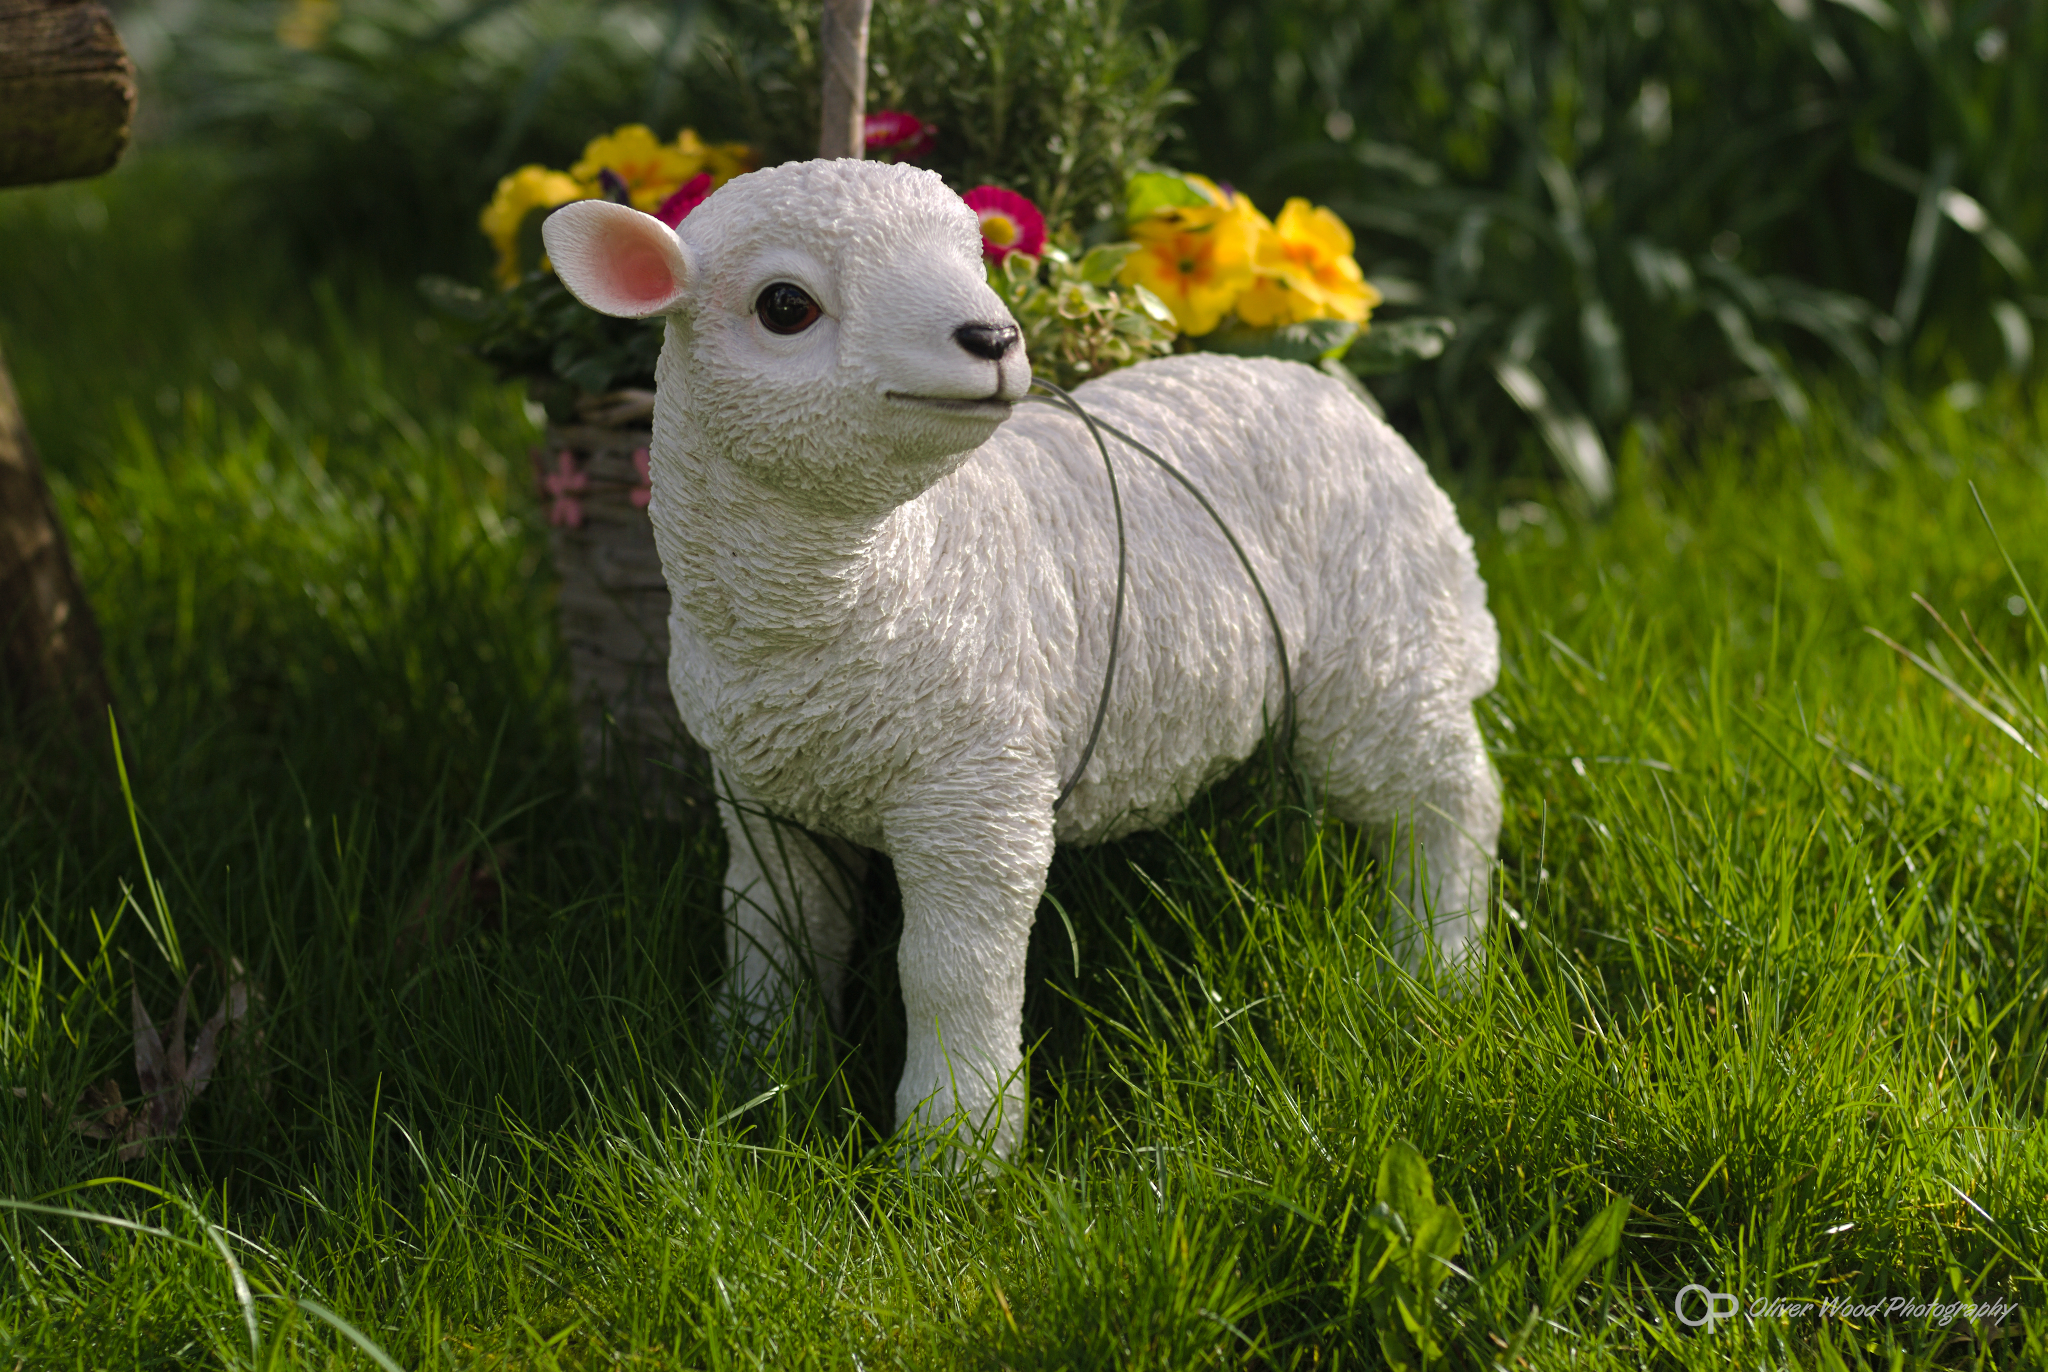 A photograph of a white lamb model in green grass with yellow flowers.